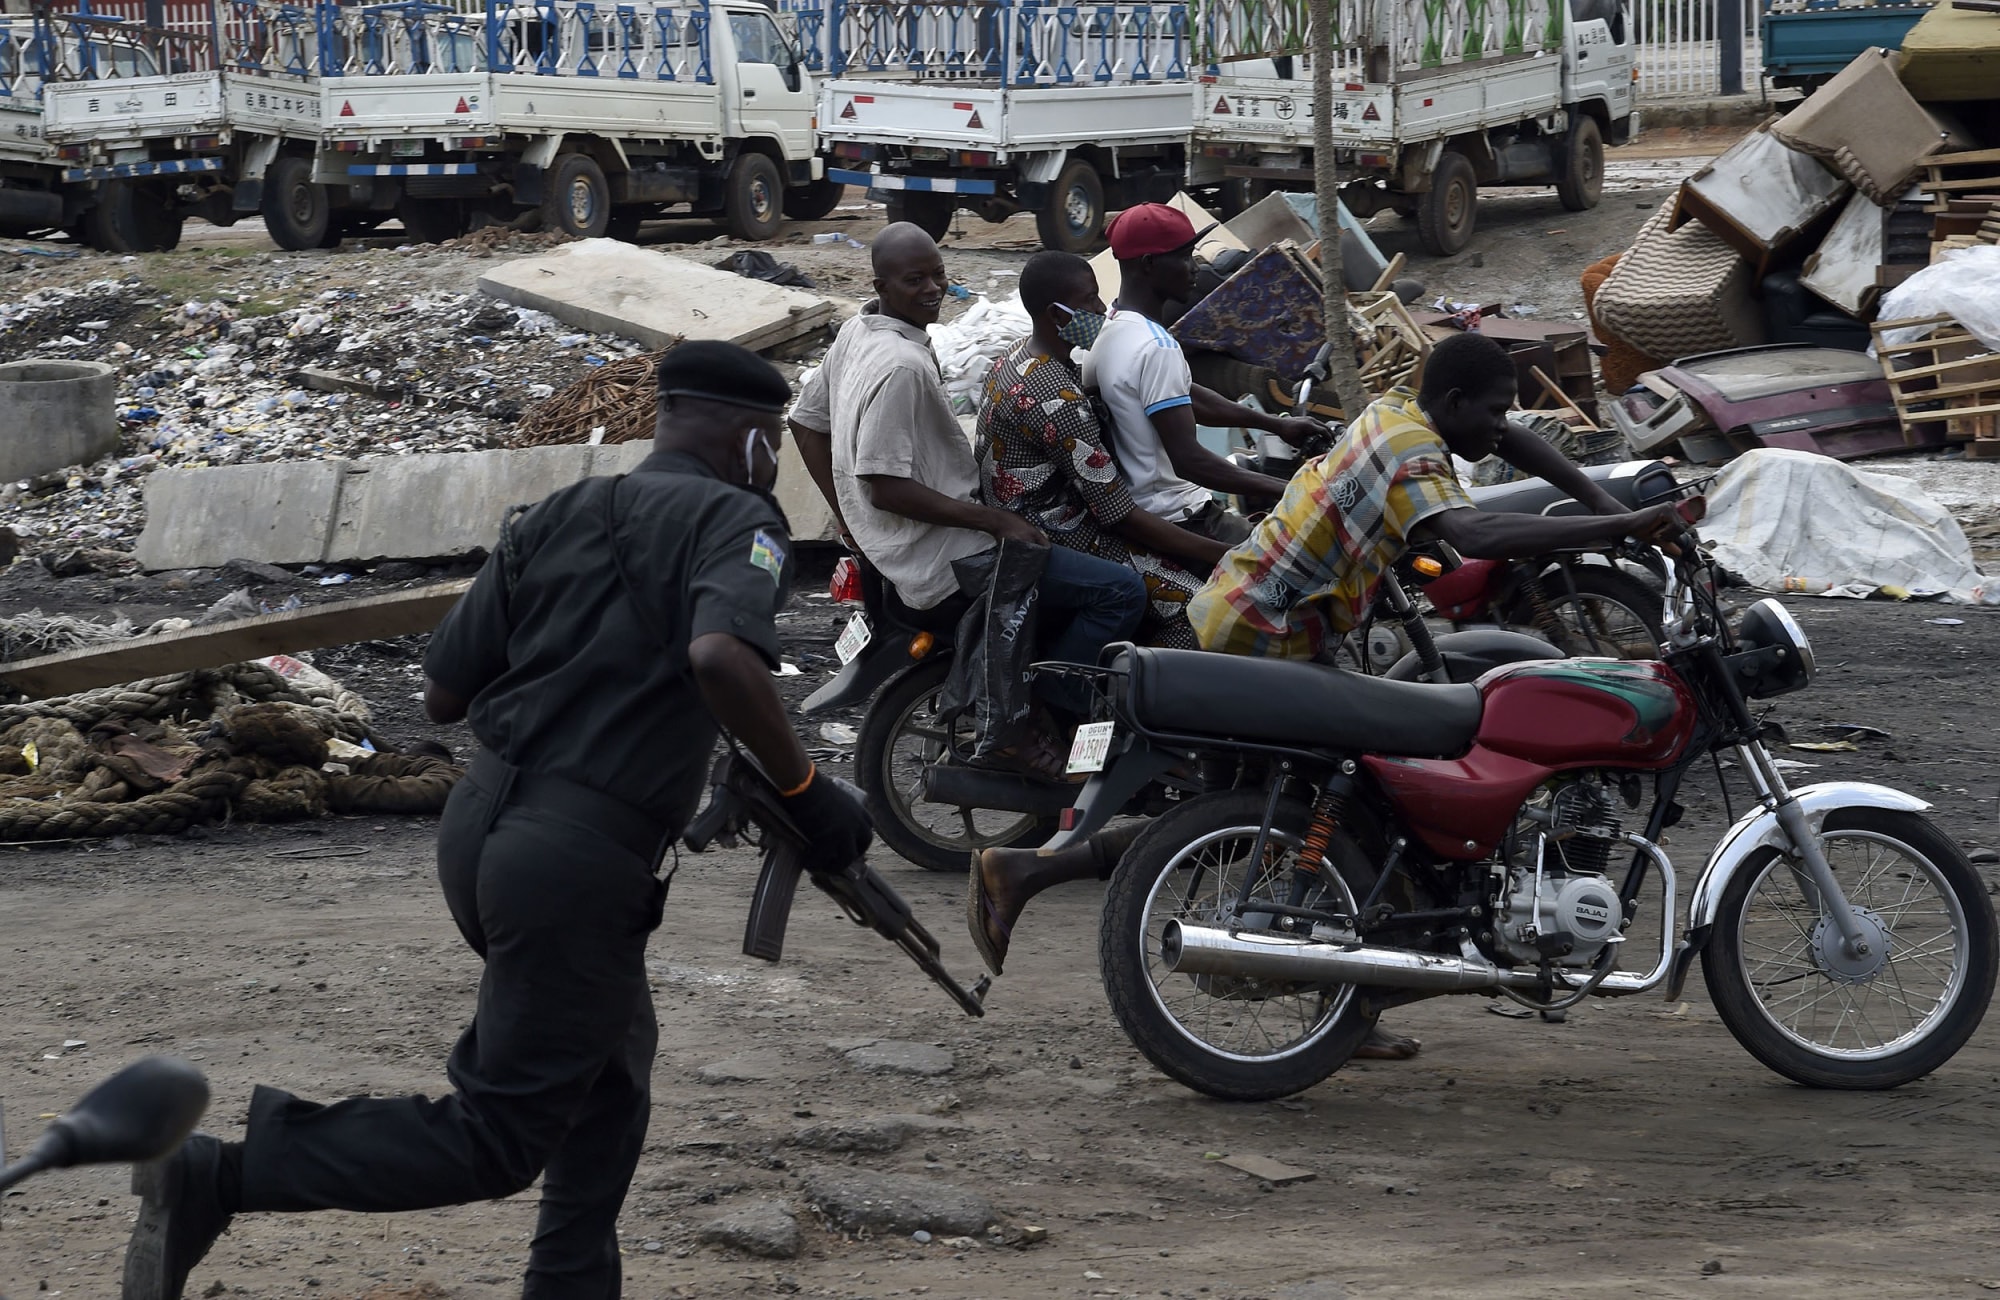 IMage: A police officer pursues fleeing motorcycle taxi riders who refused to stop at mounted barricades to check movement of vehicles and for failing to comply with the sit-at-home order to prevent the spread of COVID-19 coronavirus on Lagos Ibadan expre